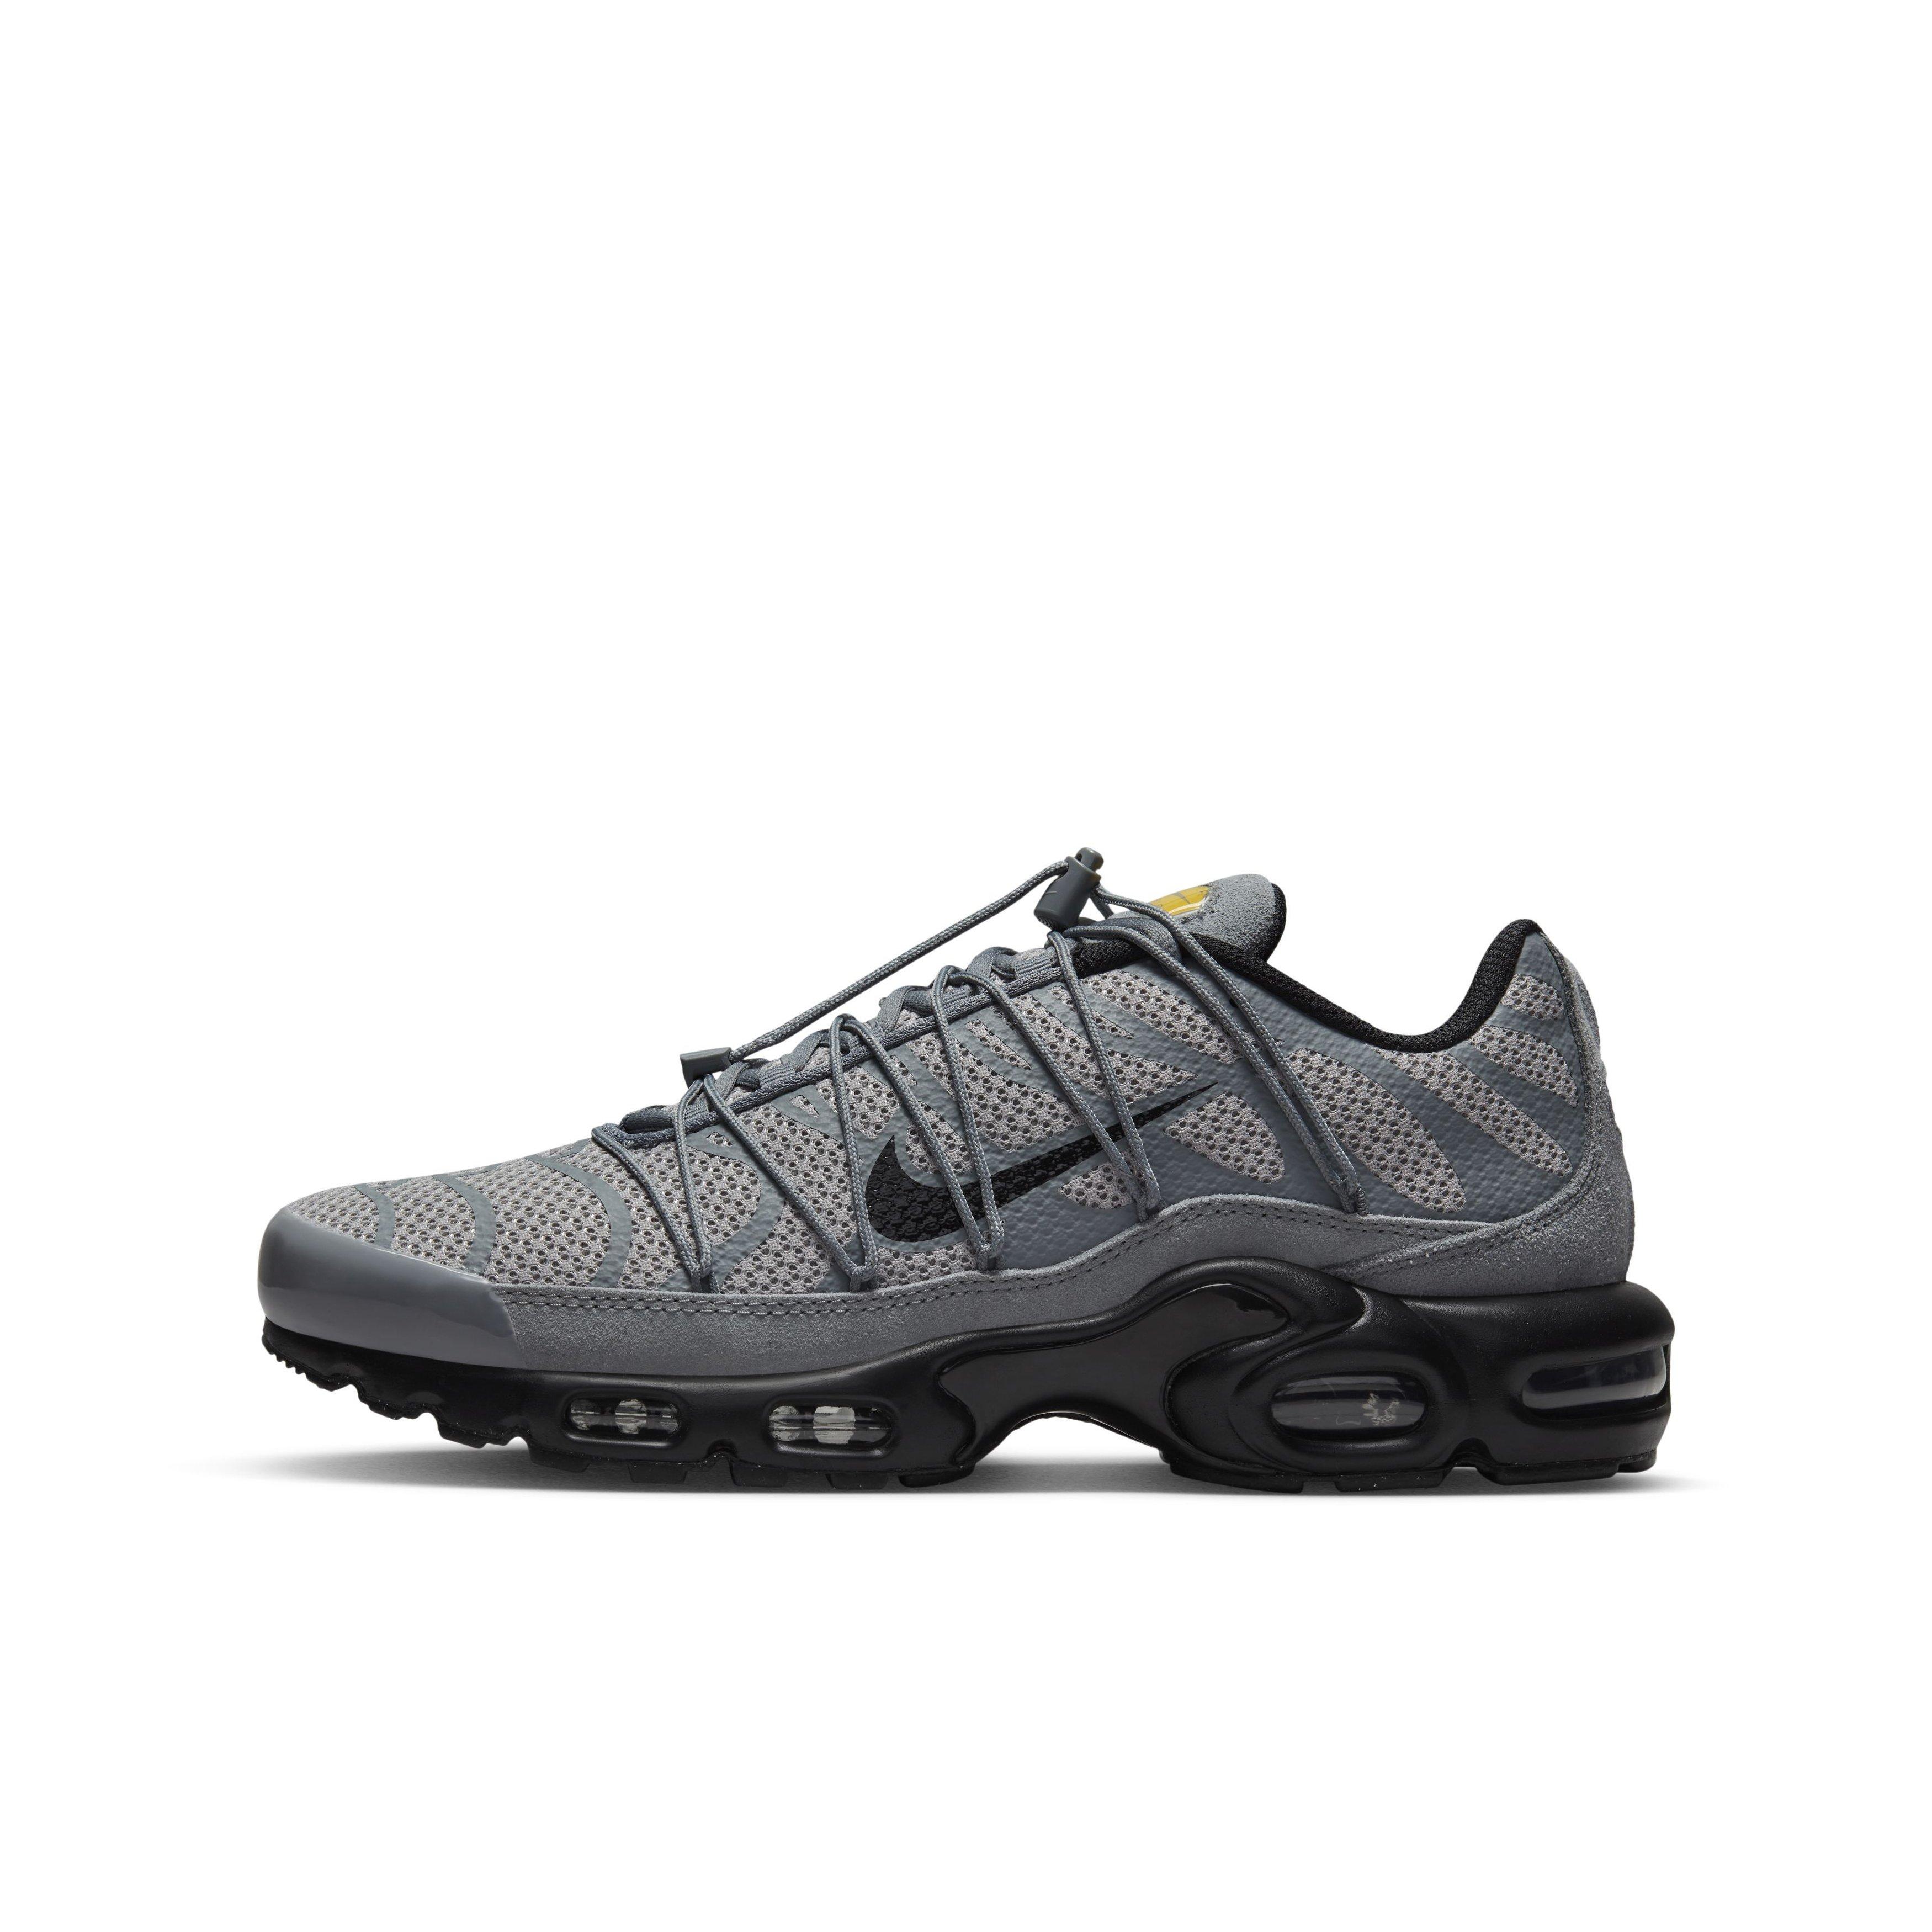 Outfit ideas - How to wear NIKE AIR VAPORMAX PLUS (WOLF GREY/DARK